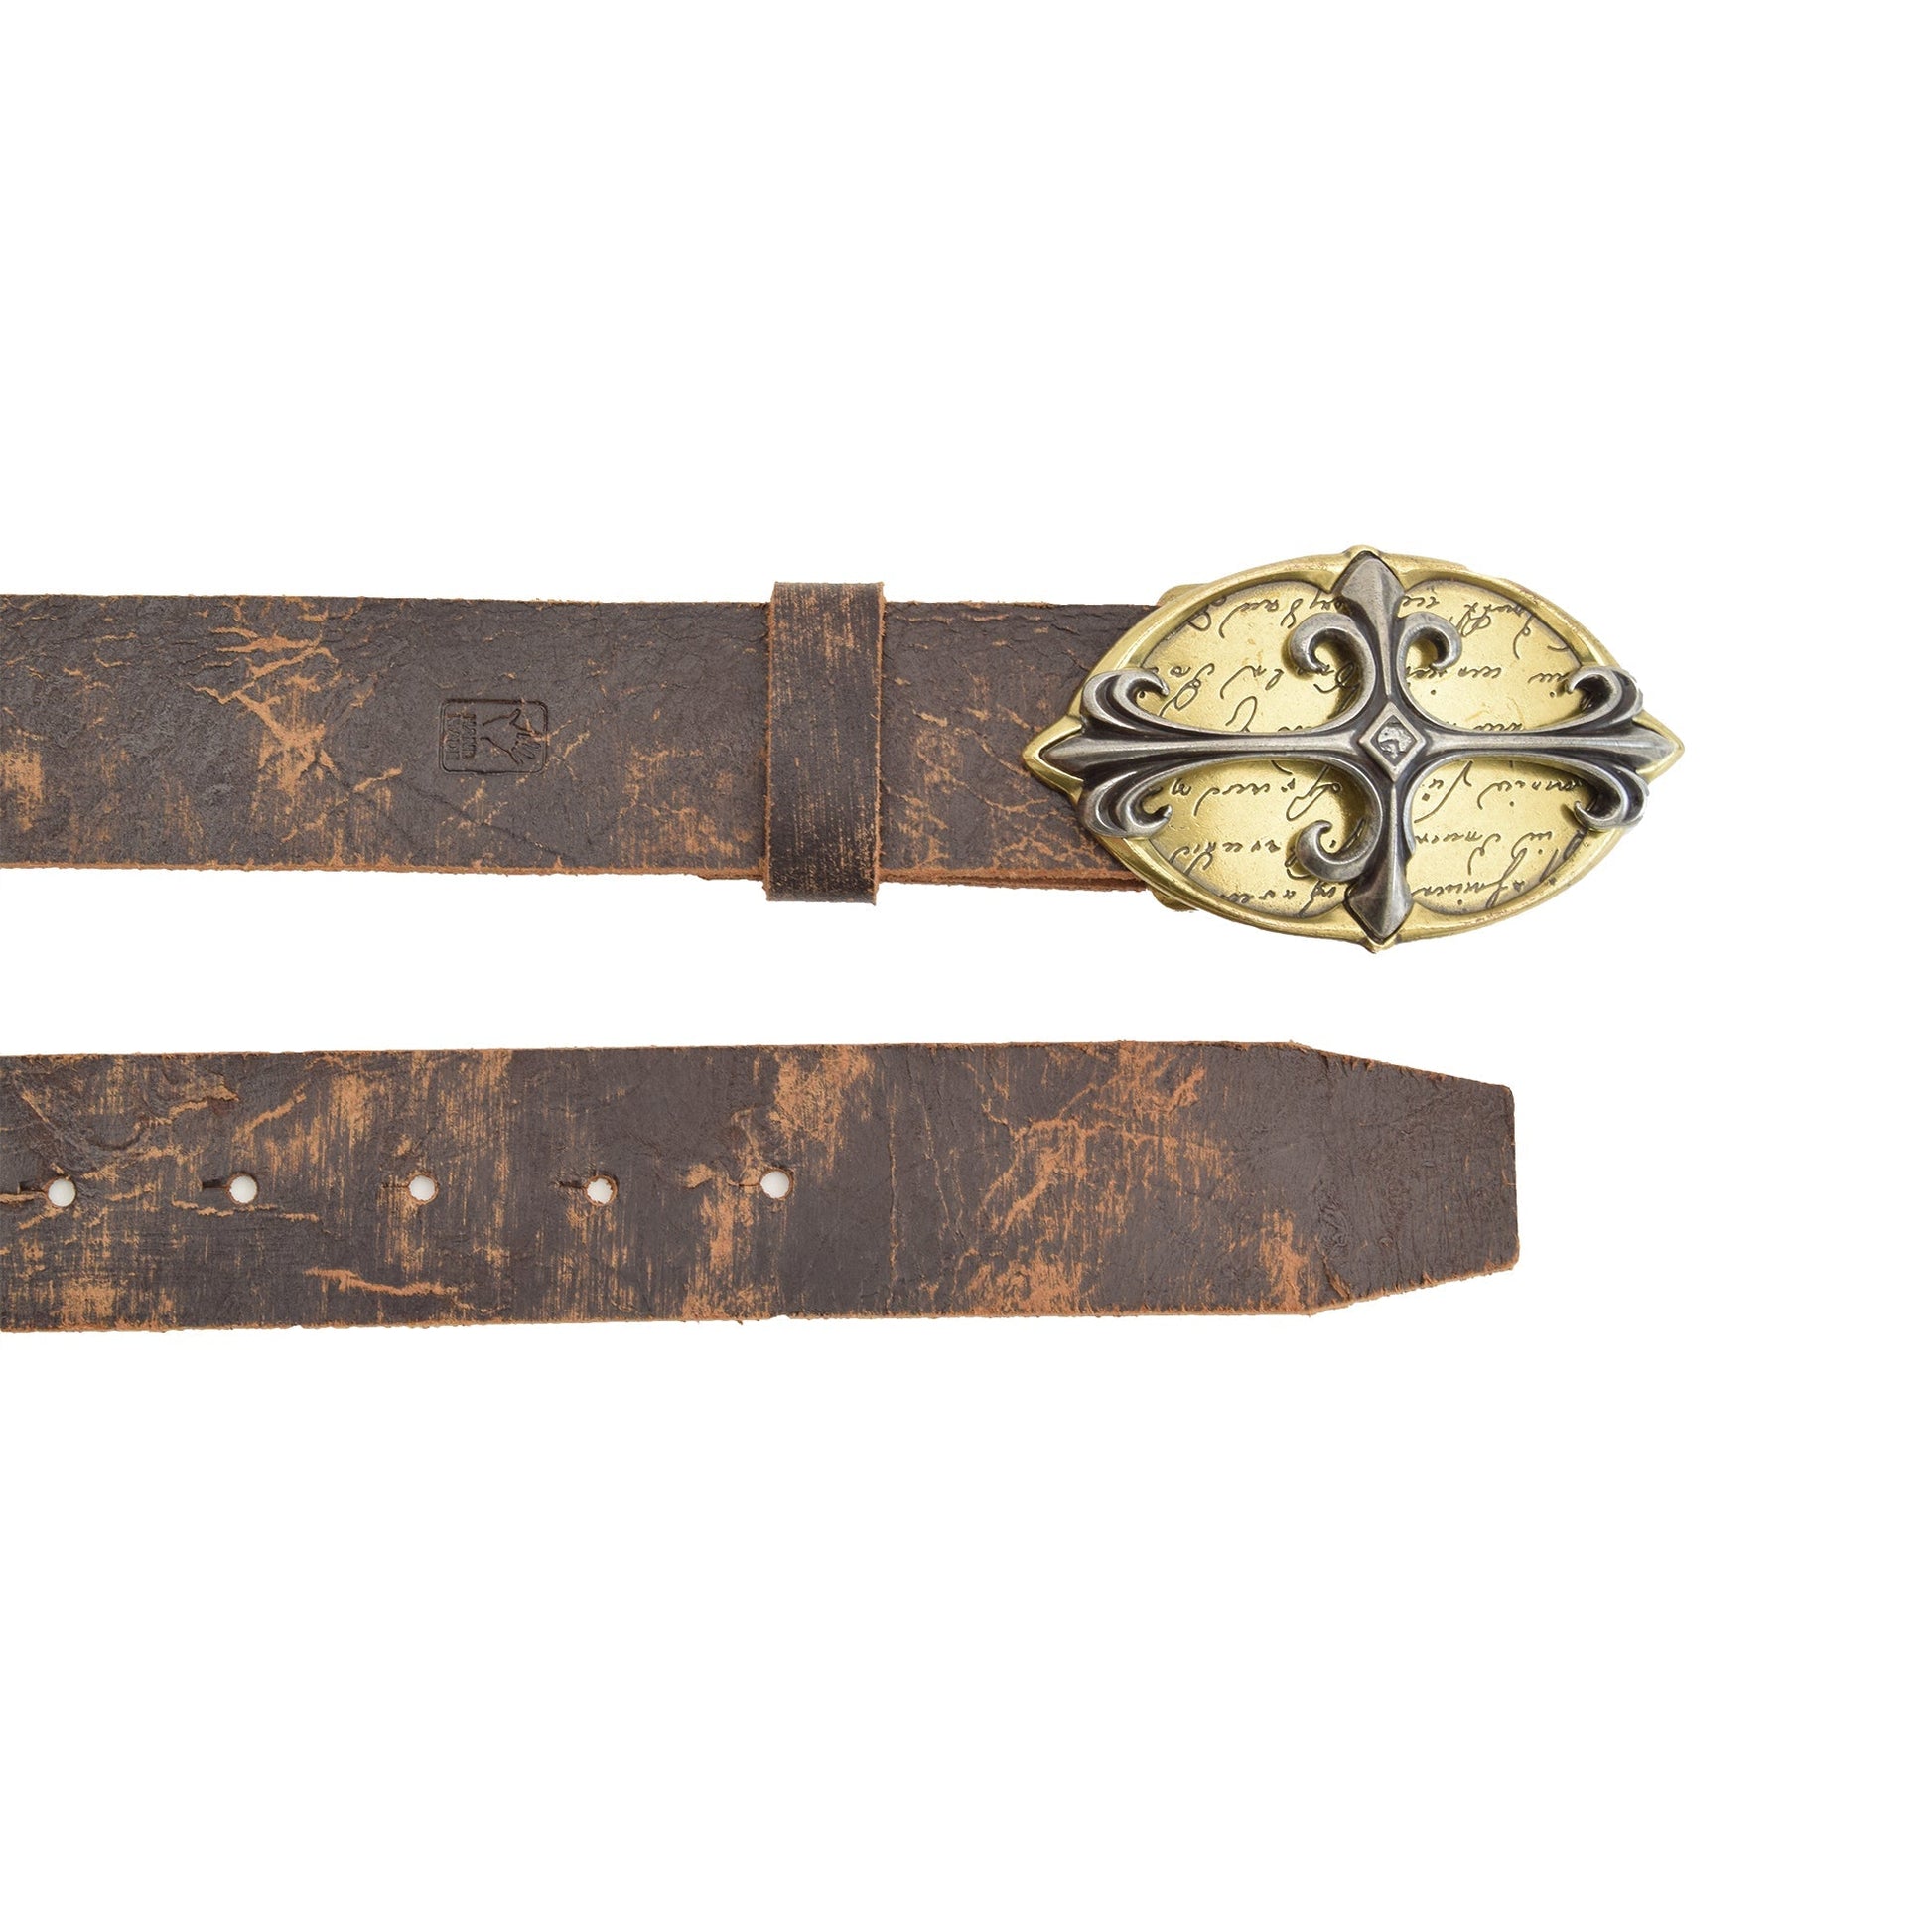 Royal Leather Belt Brown with Changeable Buckle - Belts Zengoda Shop online from Artisan Brands